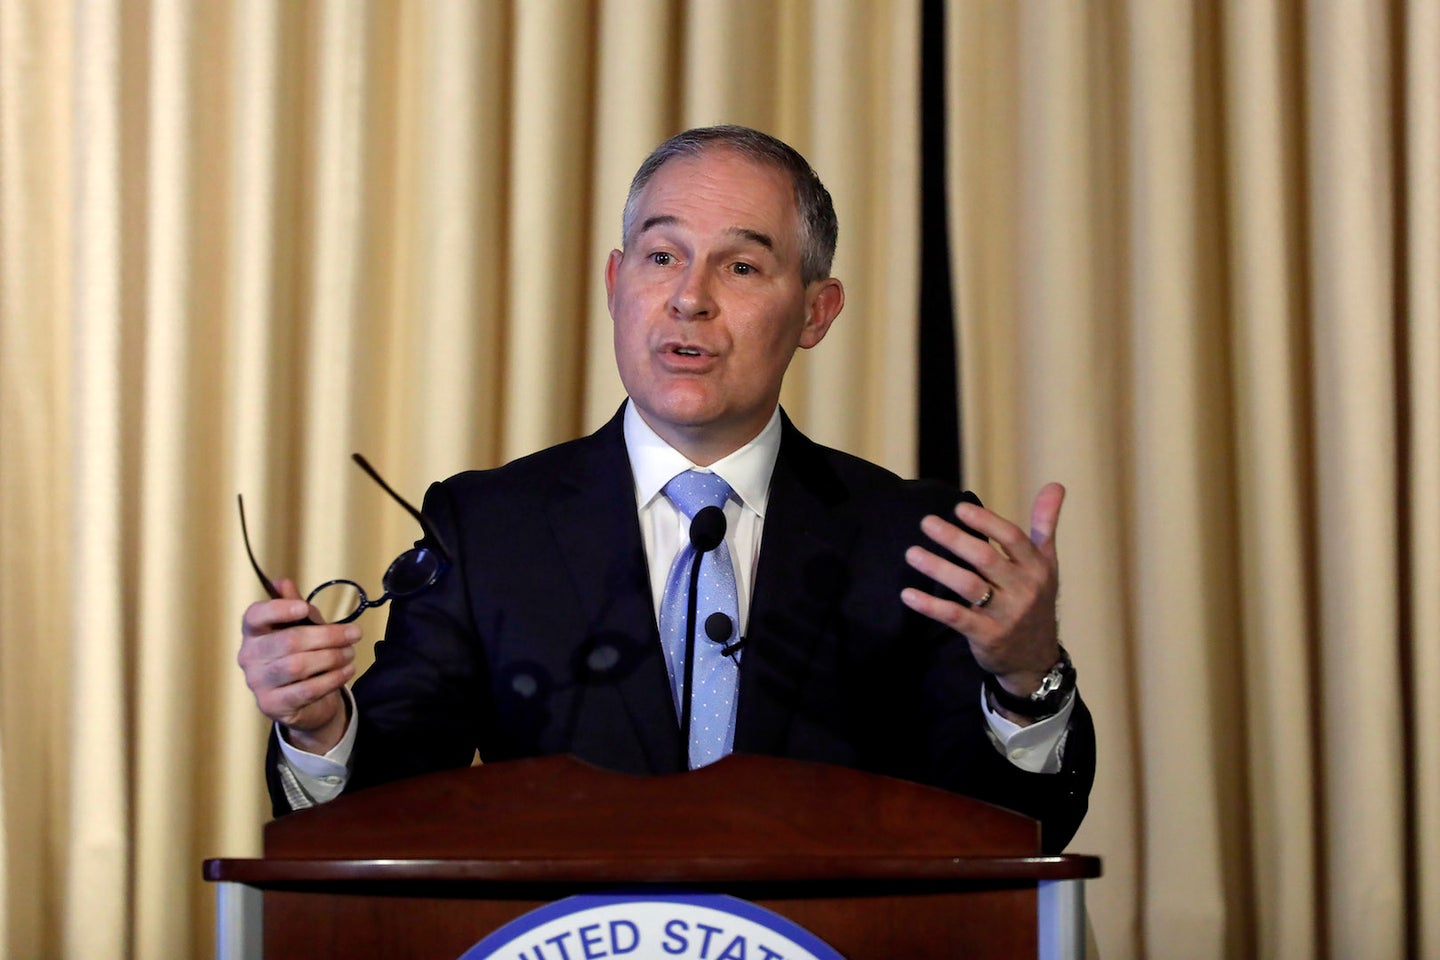 Automakers Push New EPA Chief to Withdraw Obama Emissions Regulations